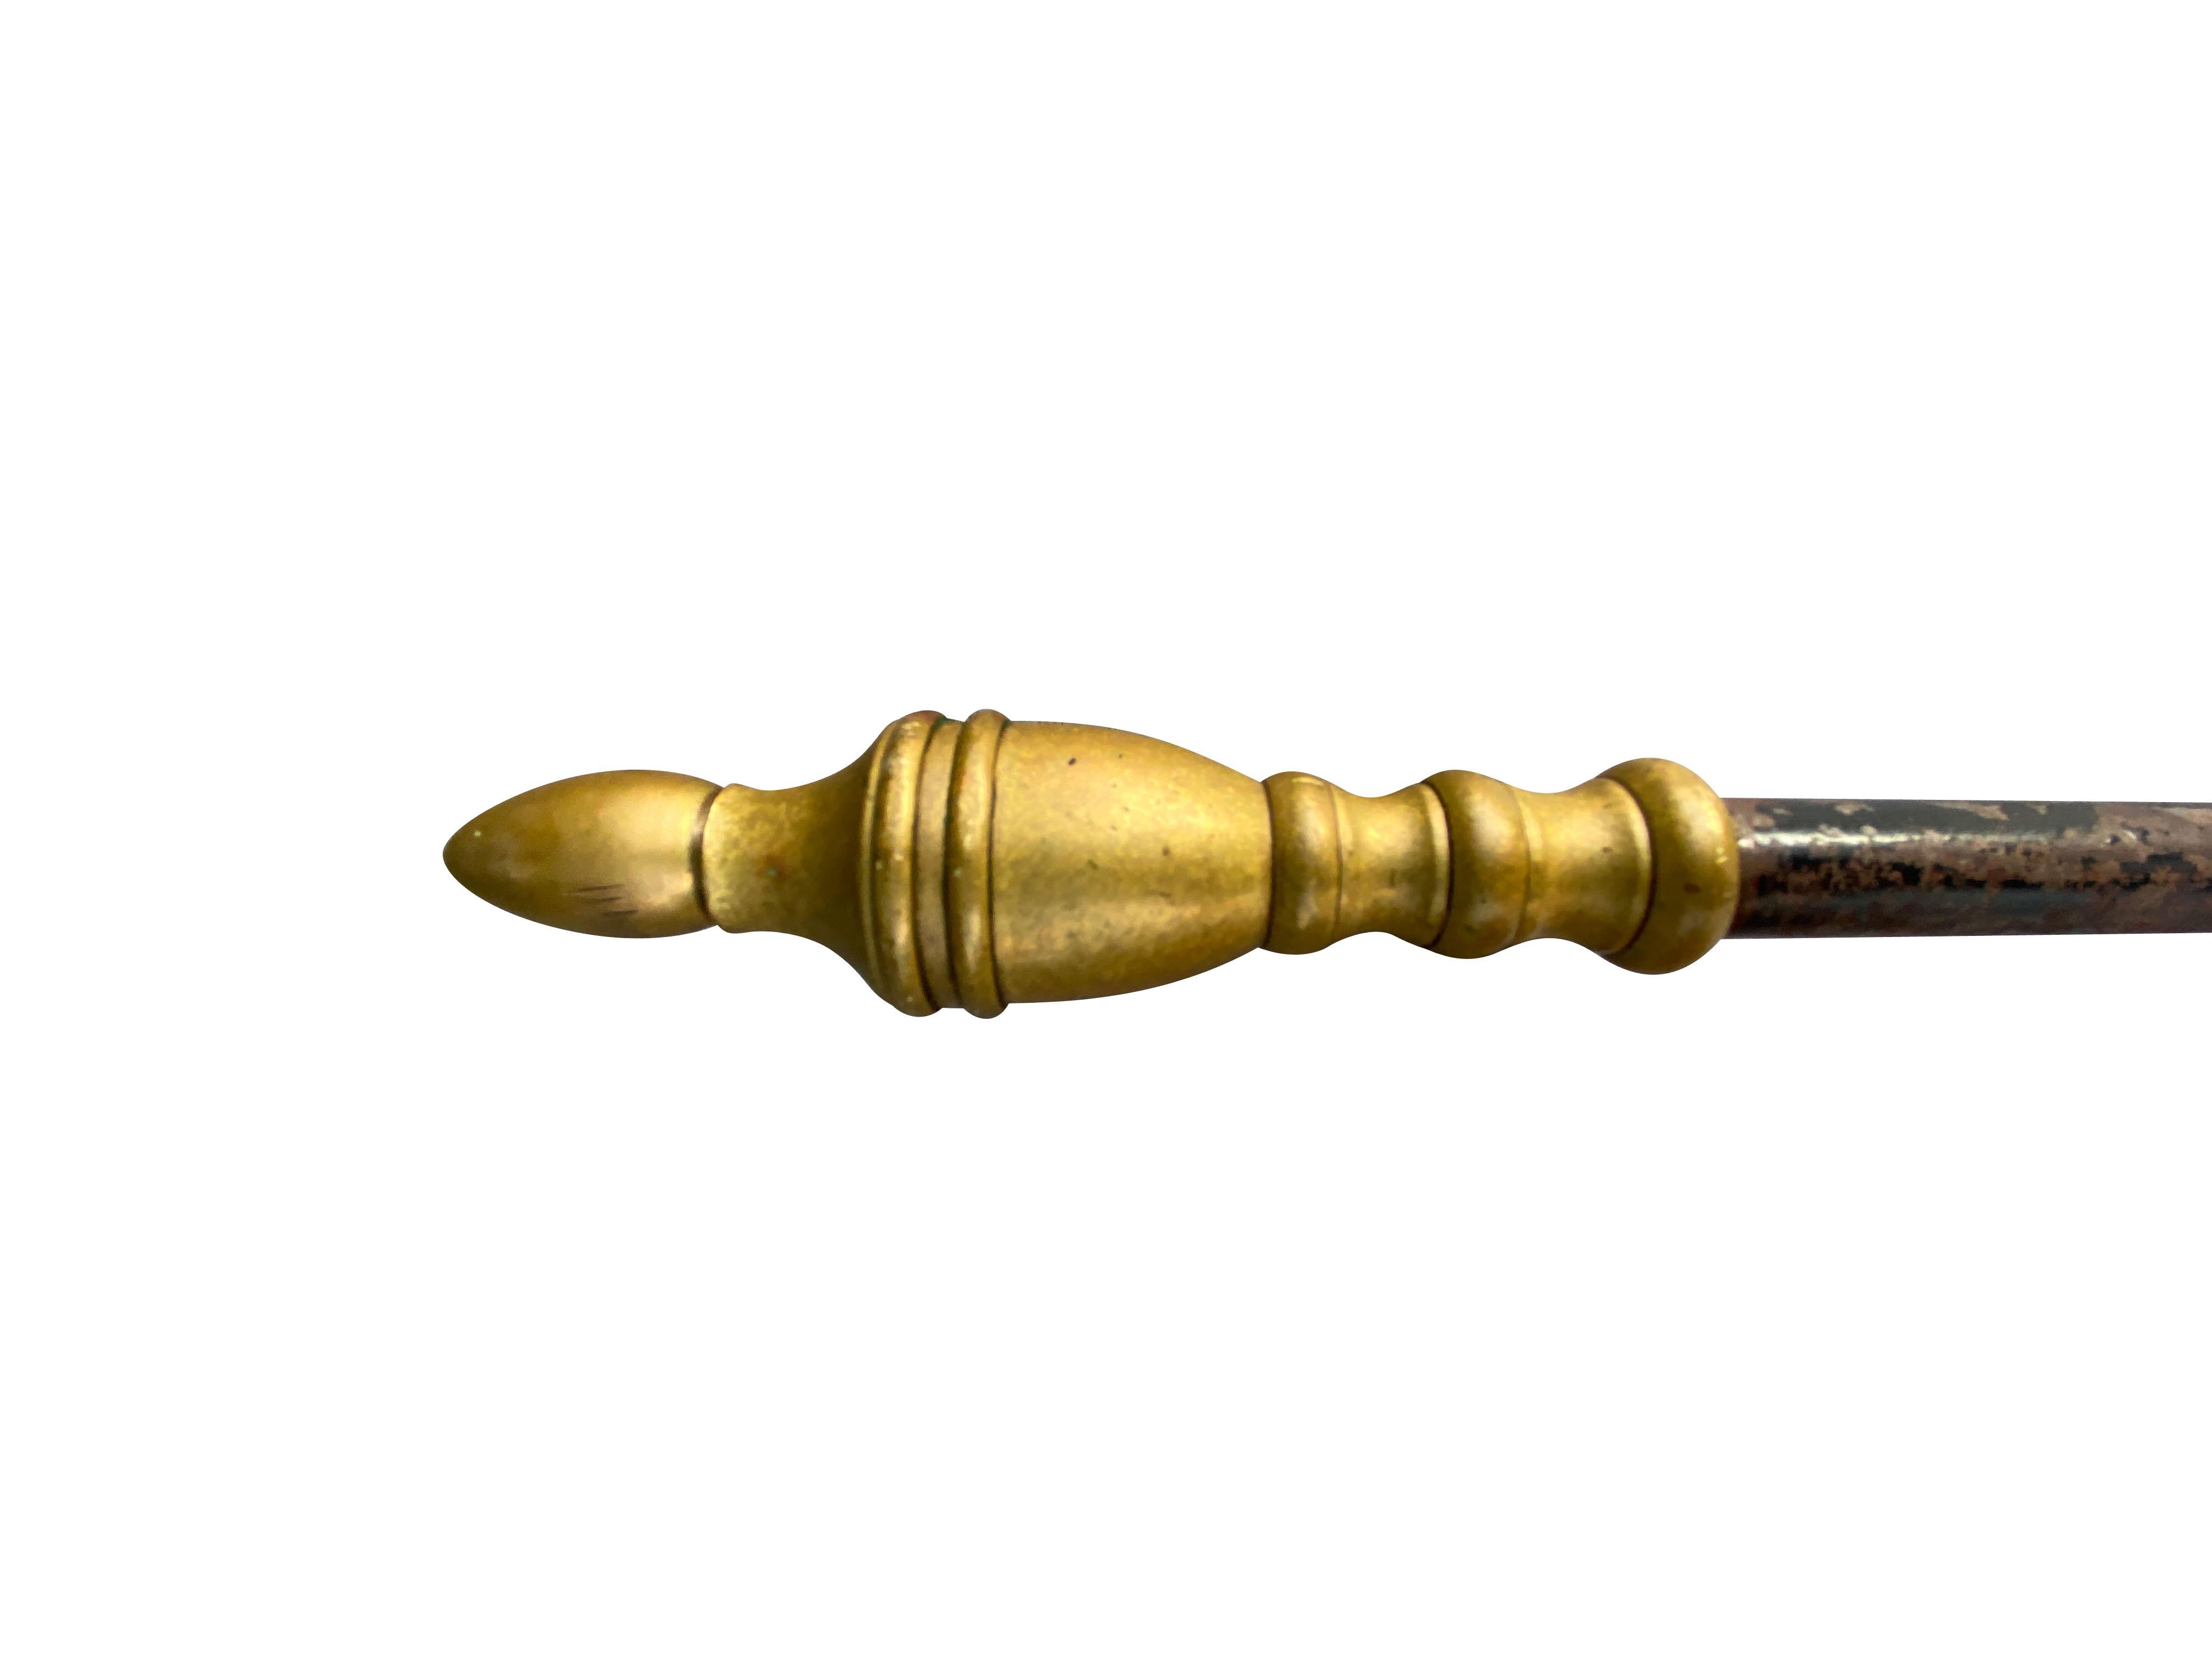 With urn form brass finial and iron shaft ending with trident fork.